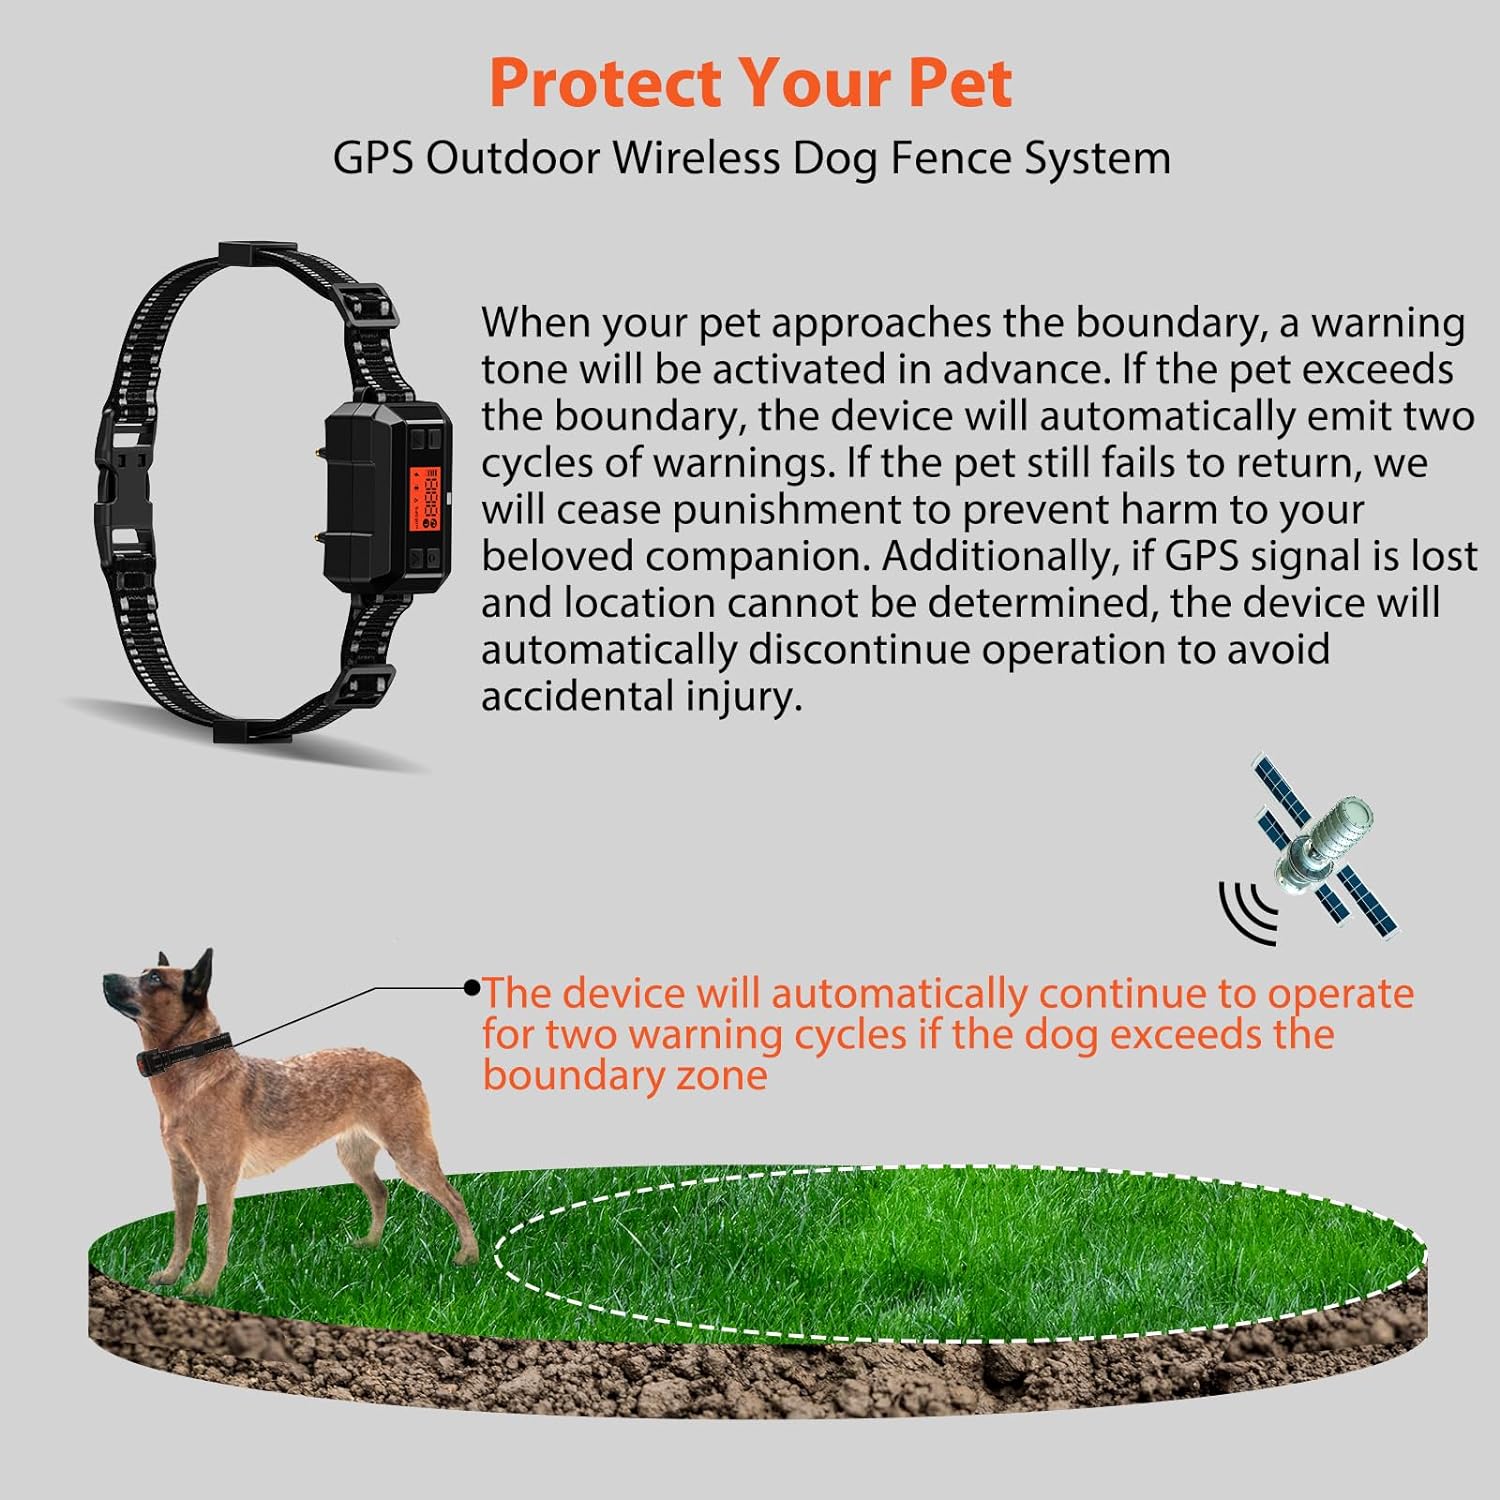 Wireless Electric Fence for Dogs, PETHEY GPS Dog Collar Fence System, IPX7 Waterproof Pet Containment System, Wireless Dog Fence Radius 33-999 Yards, 20-110lb Adjustable Wireless Pet Fence